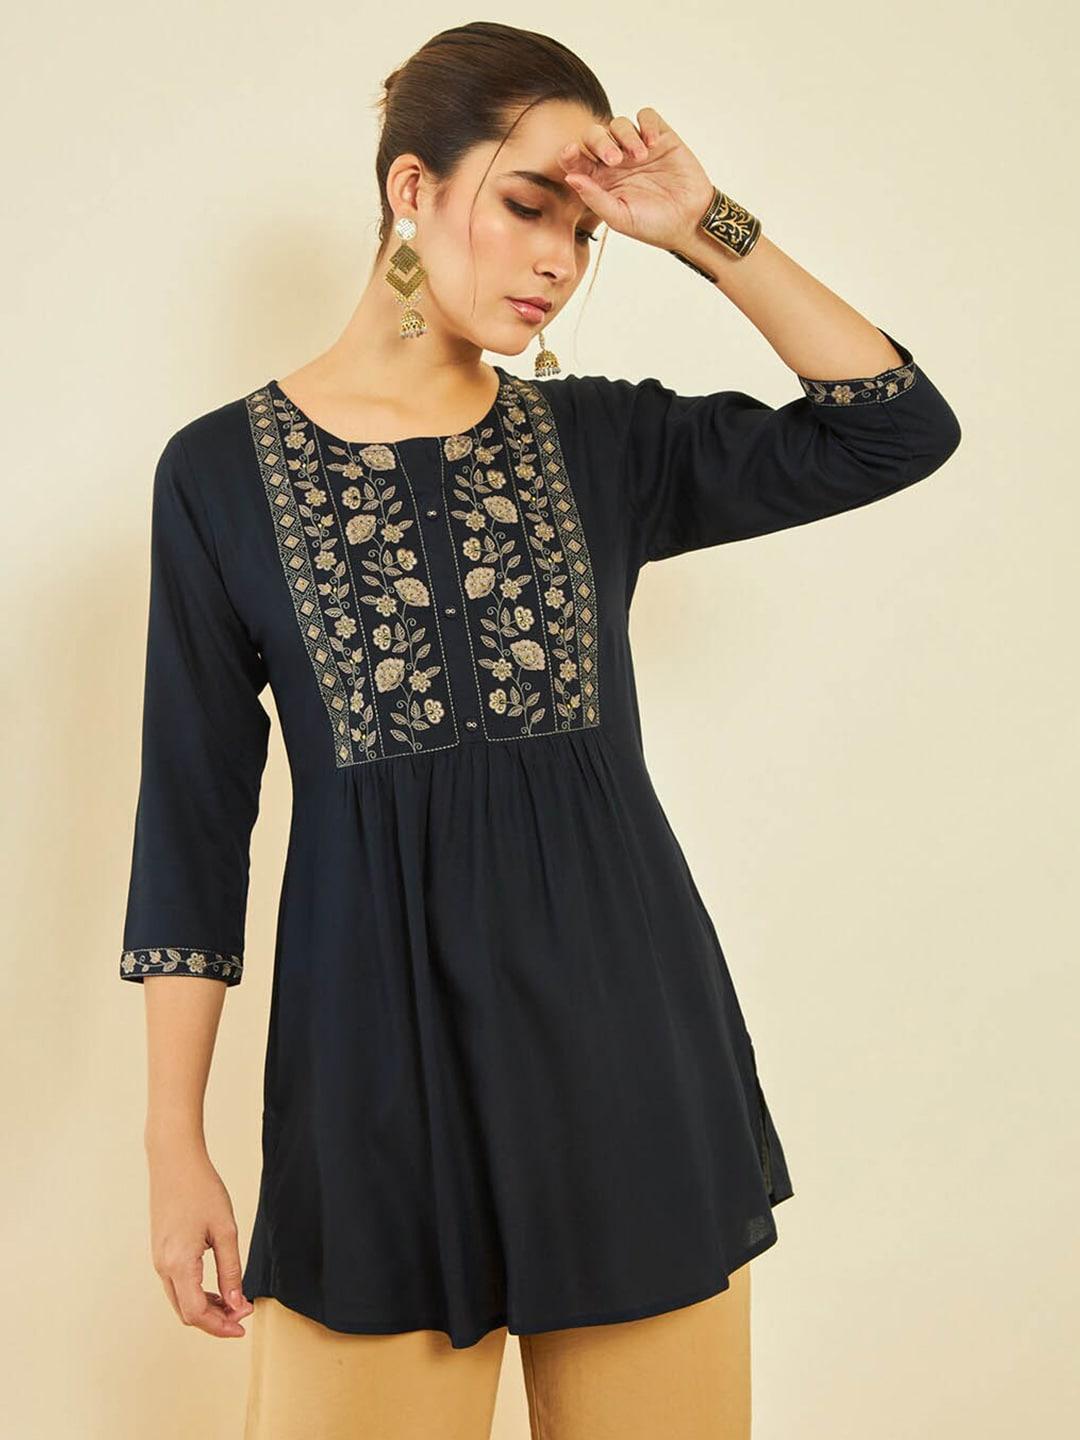 Soch Floral Print Round Neck Three-Quarter Sleeves Pleated Tunic